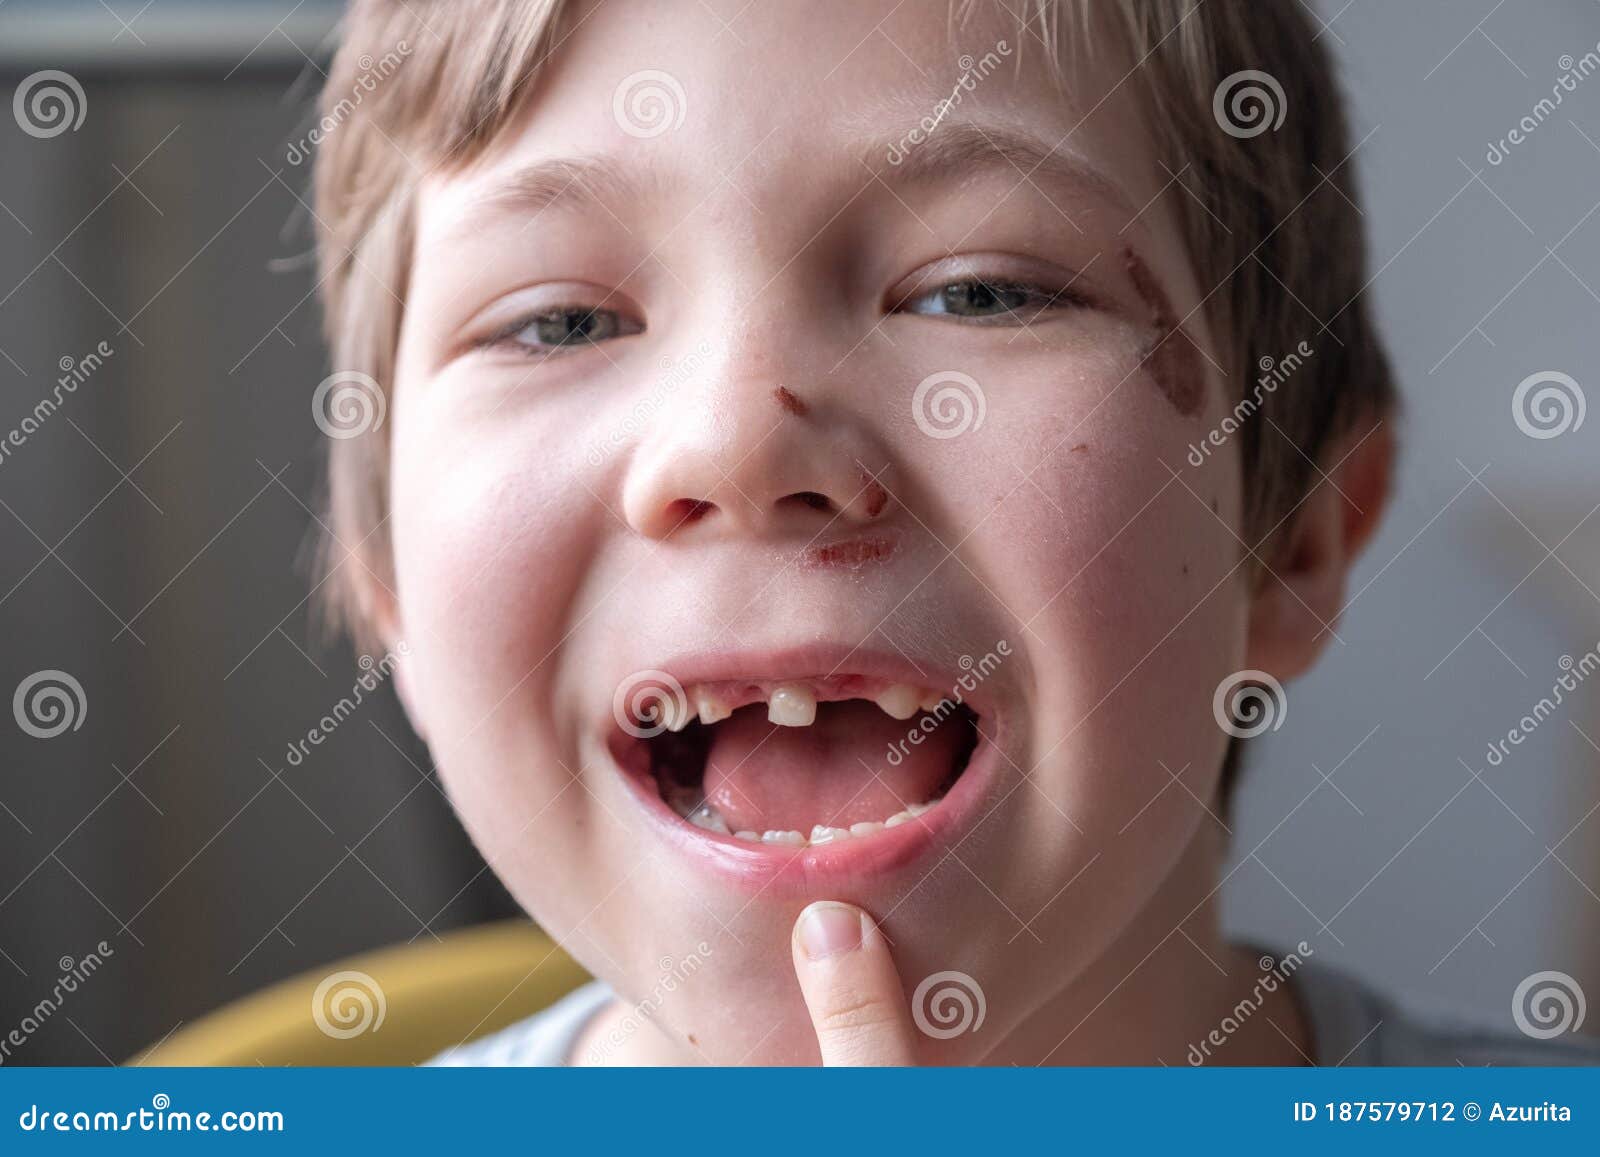 Portrait Of A Little Toothless Girl. Stock Photo - Image 